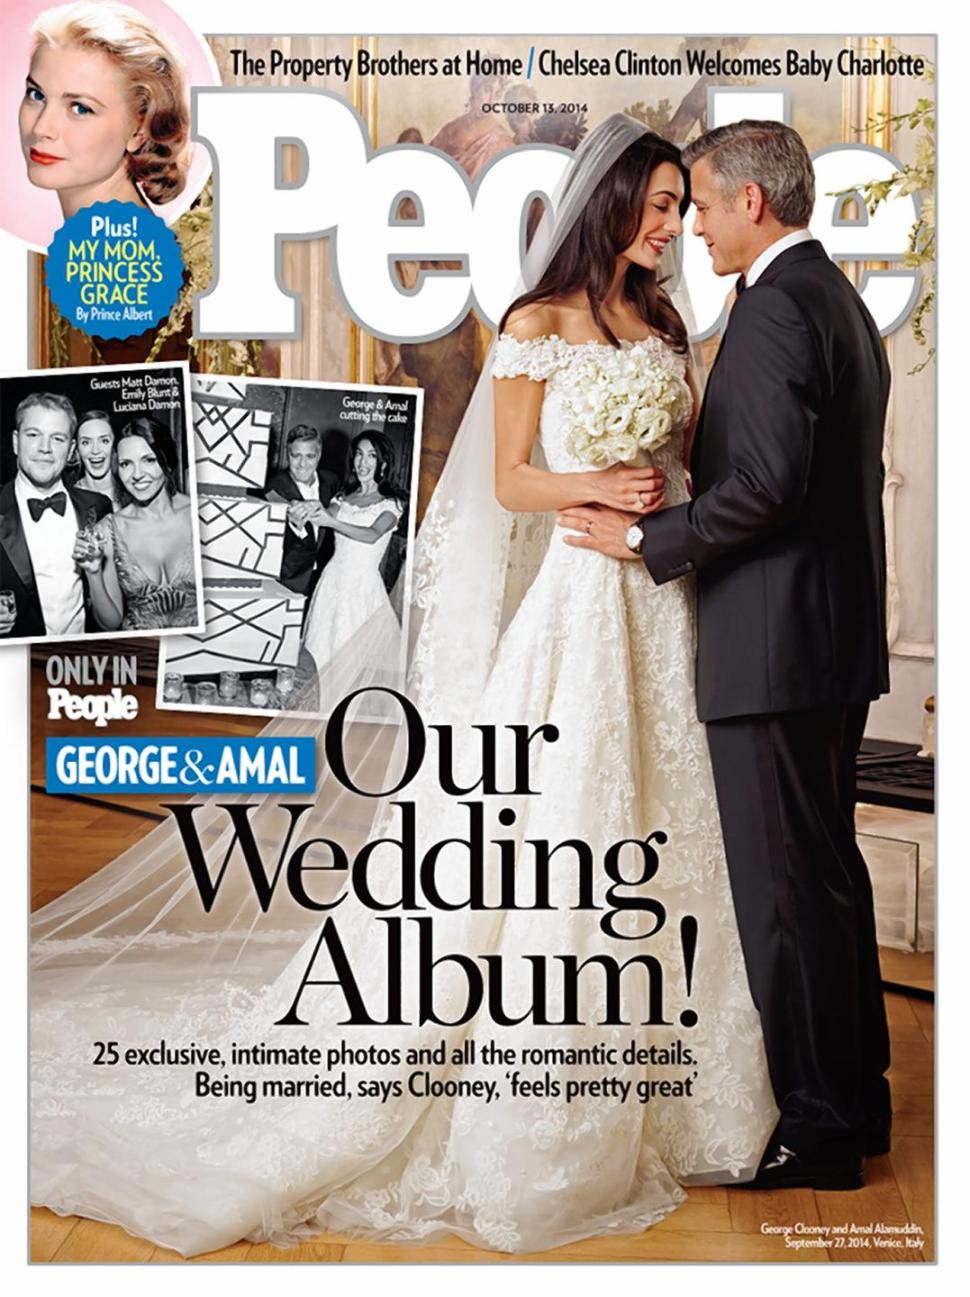 The People magazine cover showing actor George Clooney and Amal Alamuddin at their Sept. 27 wedding.